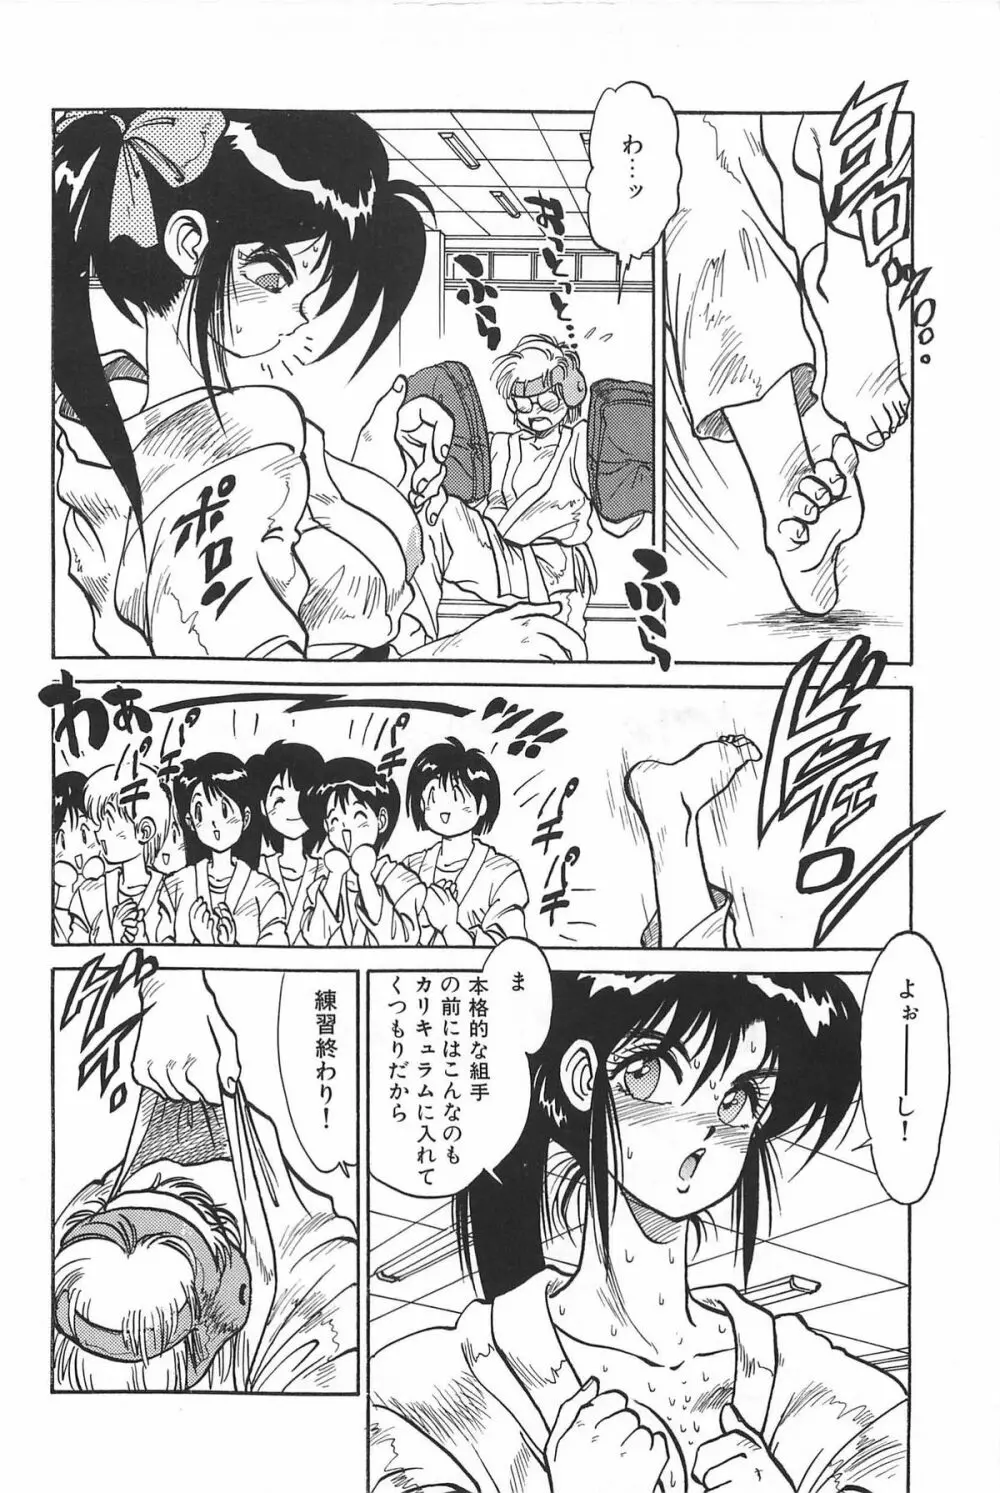 LOVE ME 1995 Page.182